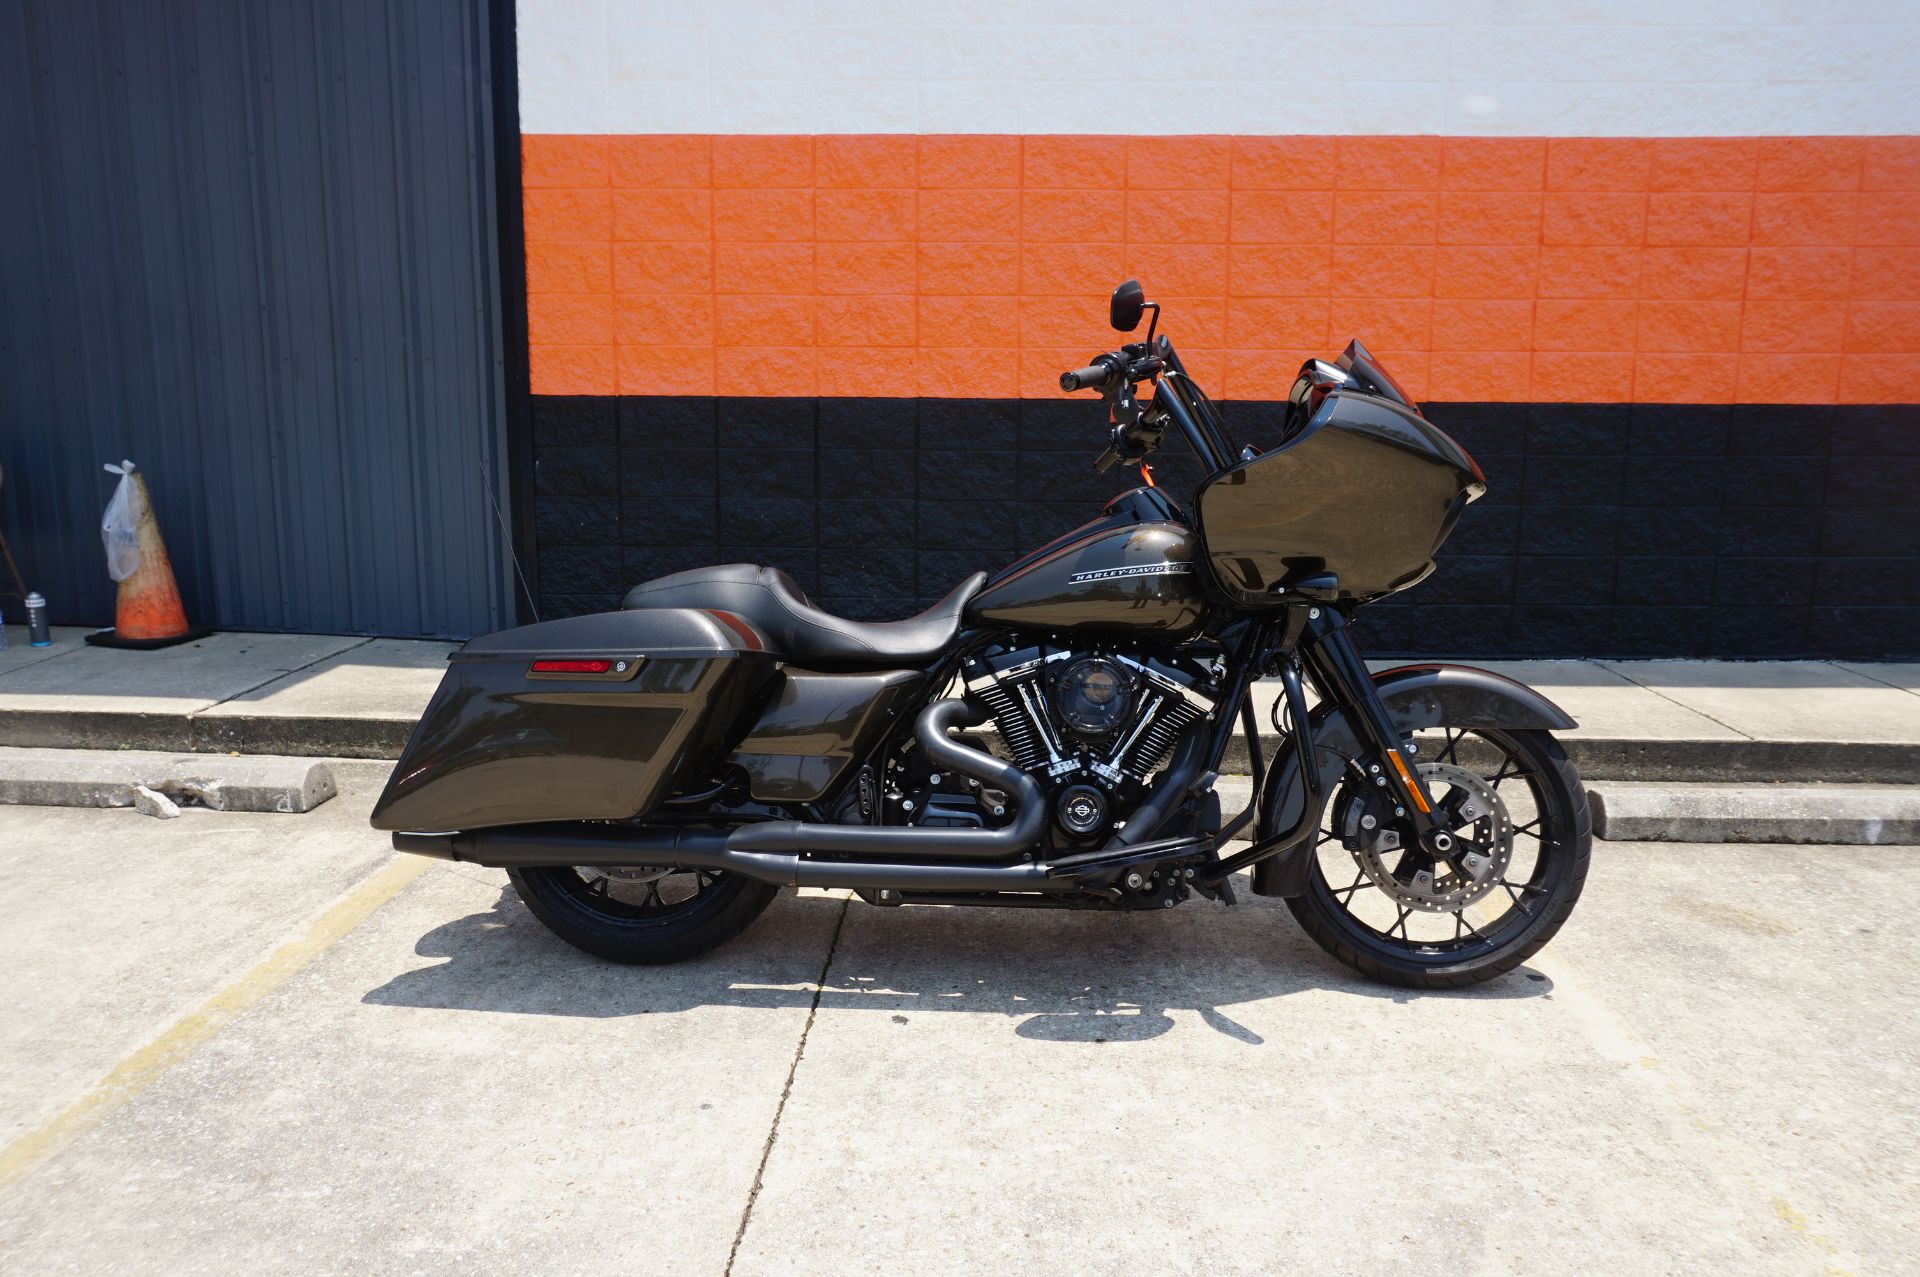 2020 Harley-Davidson Road Glide® Special in Metairie, Louisiana - Photo 1